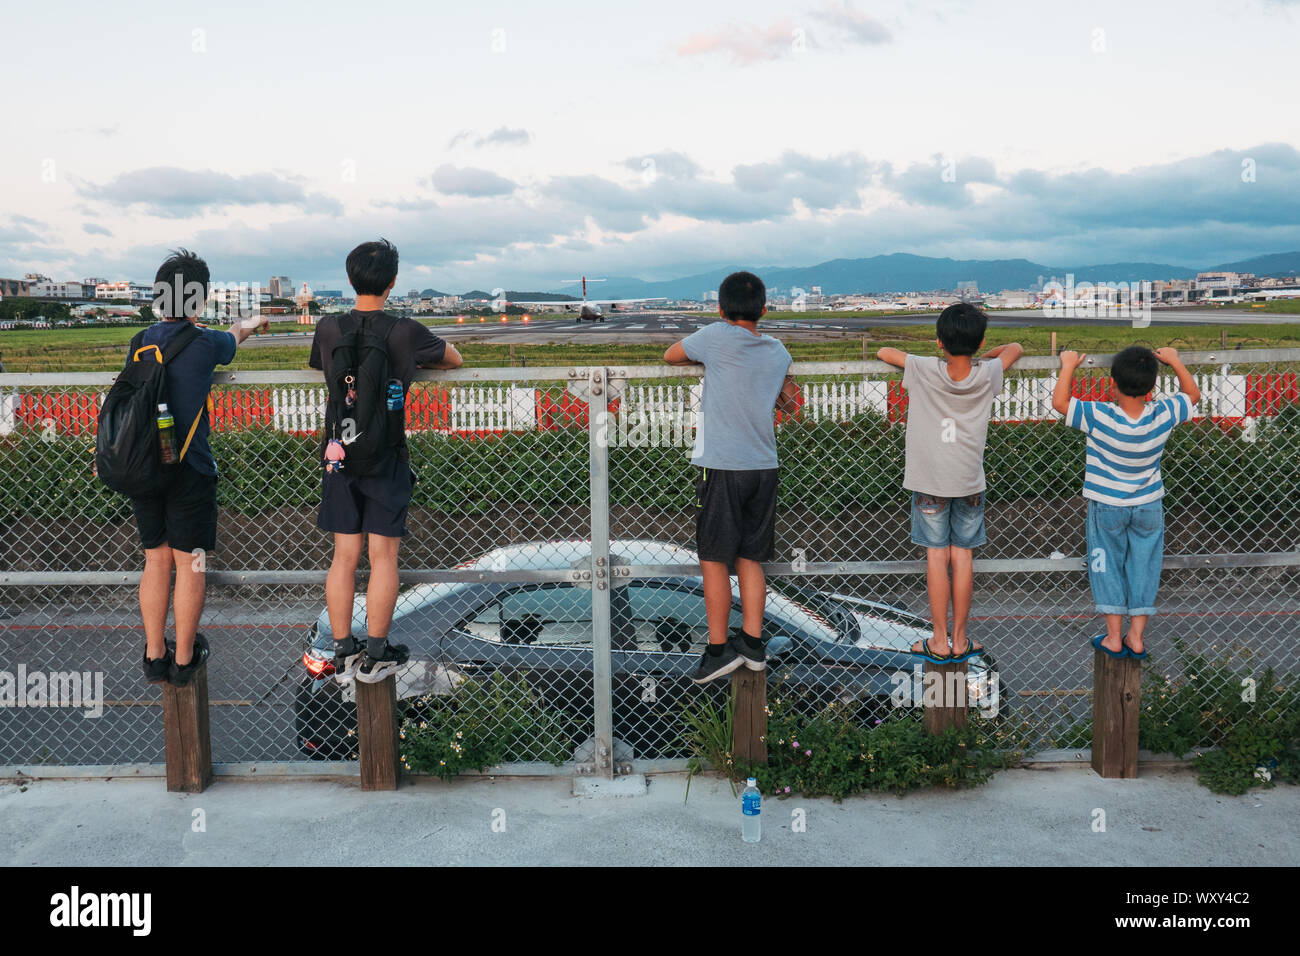 Five young boys watch an aircraft takeoff from the perimeter fence at Taipei's Songshan Airport, Taiwan Stock Photo